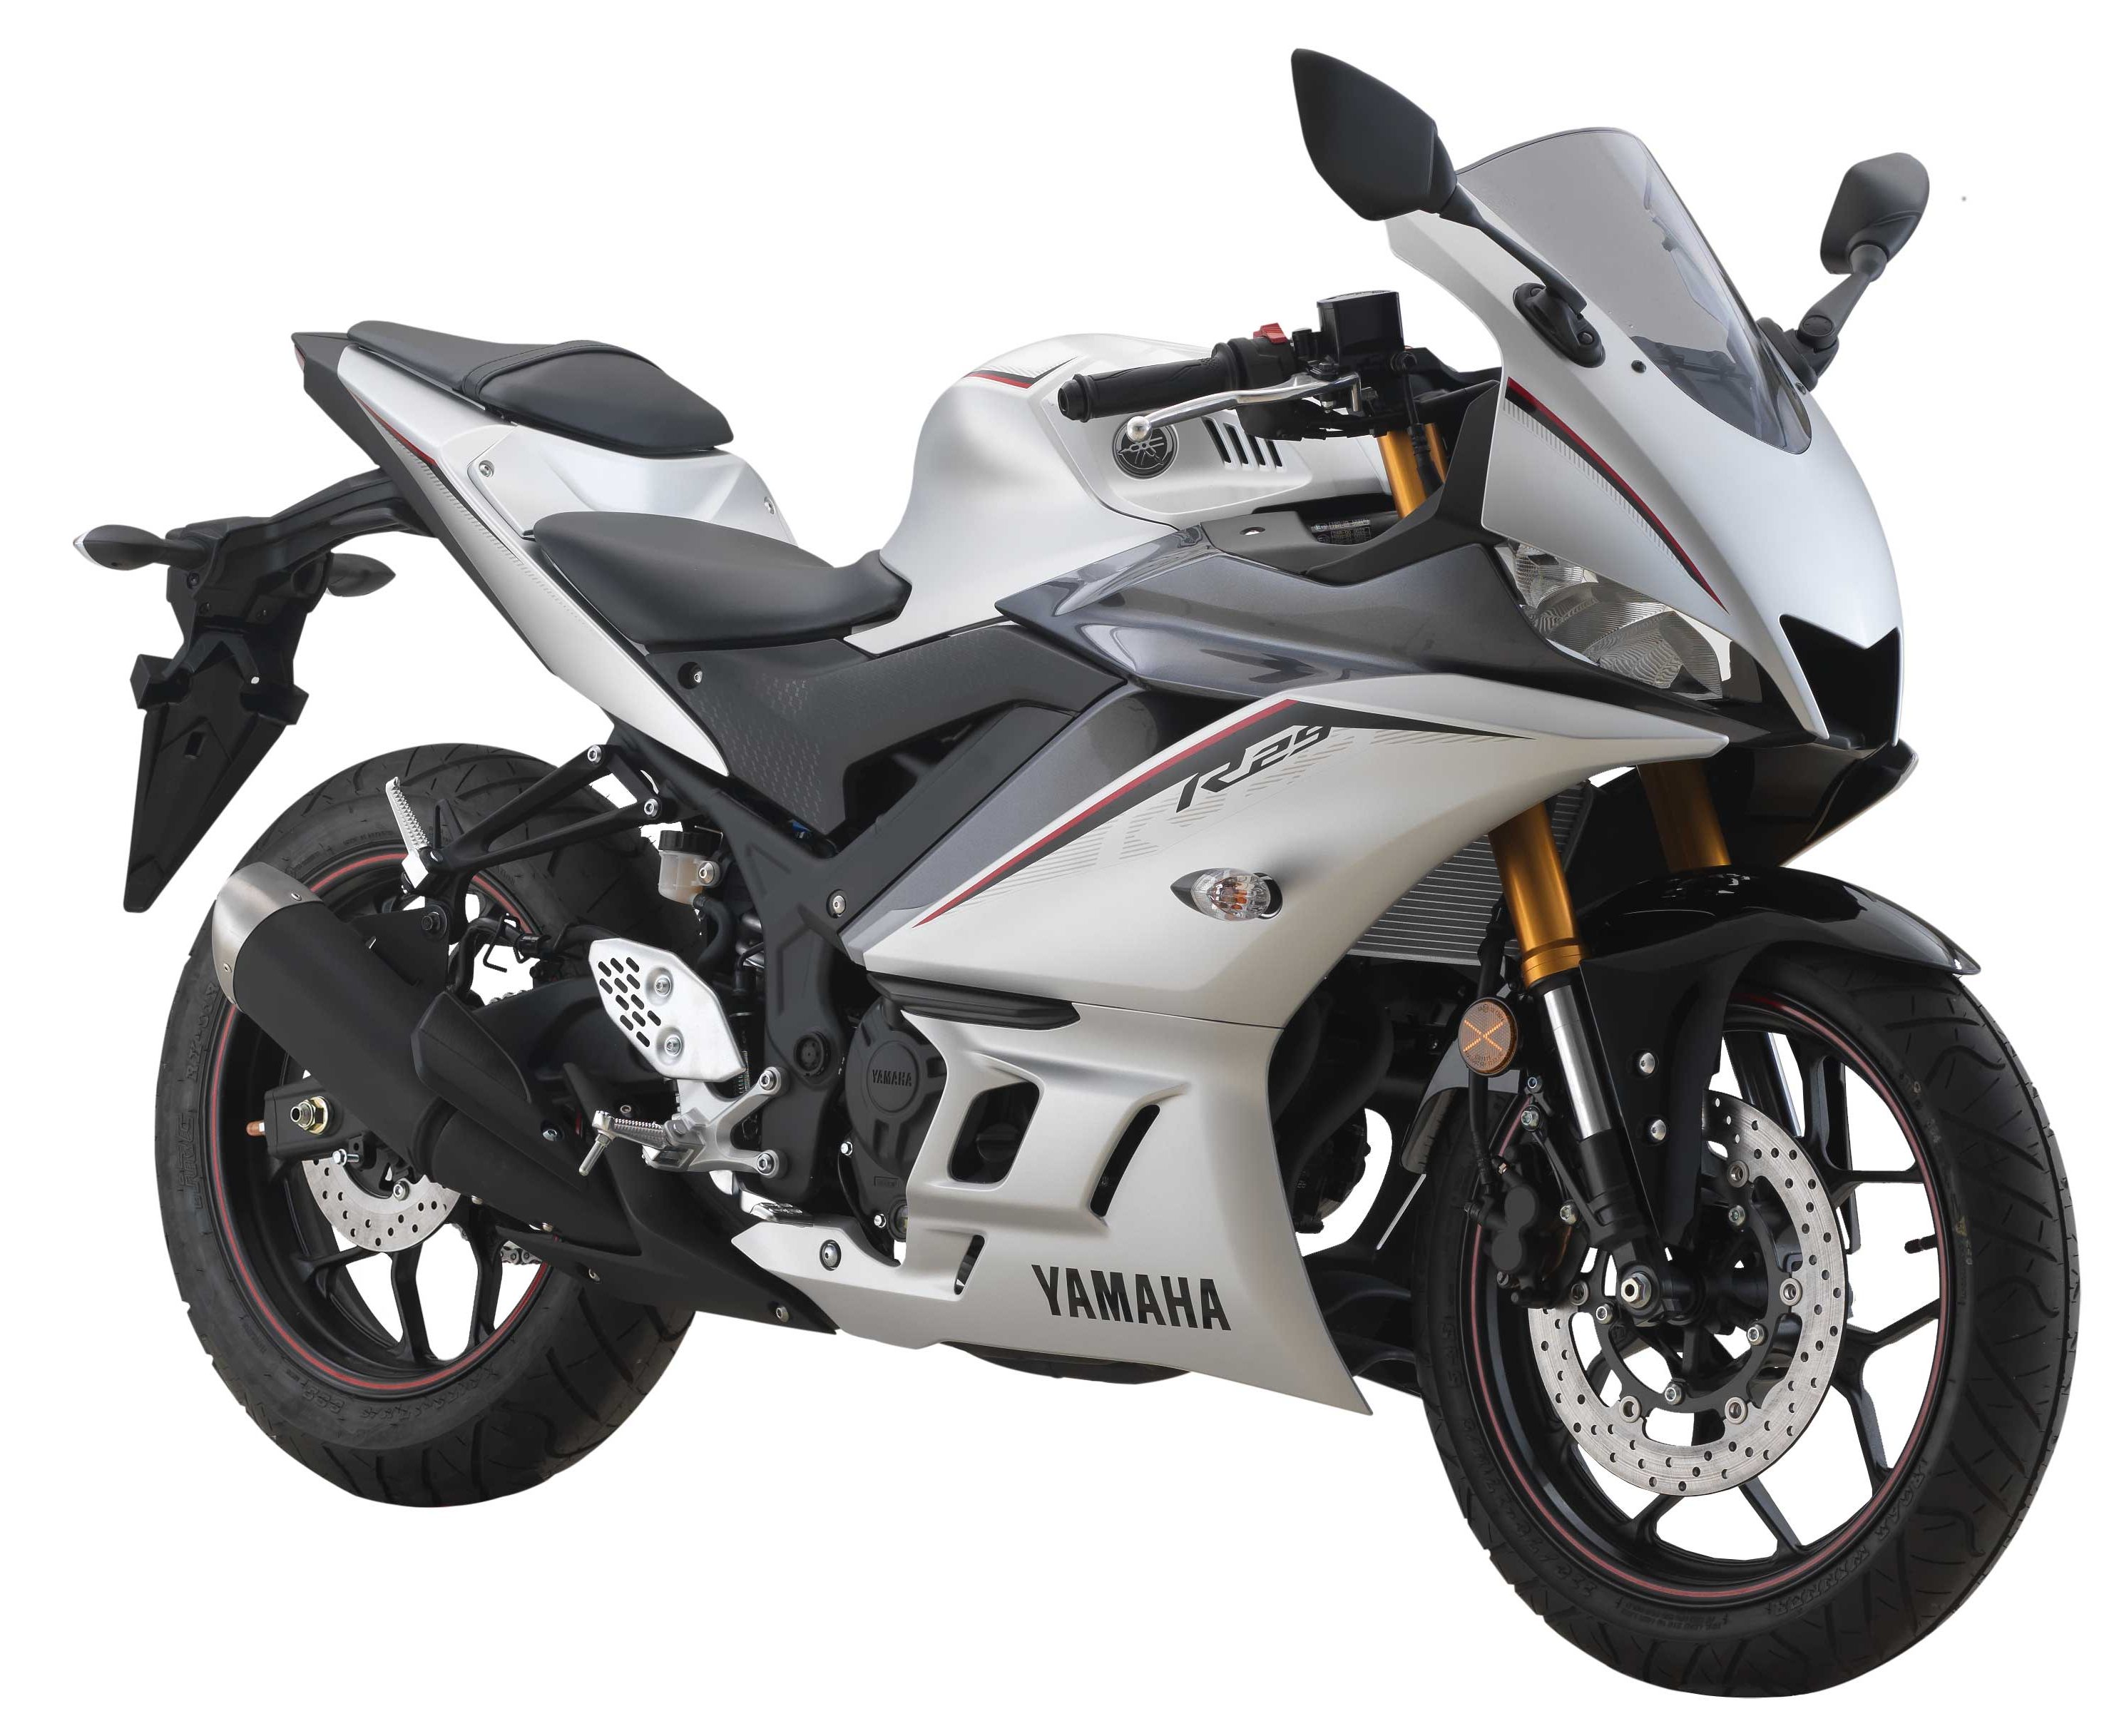 2020 Yamaha YZF-R25 Sports Bike Officially Revealed - view